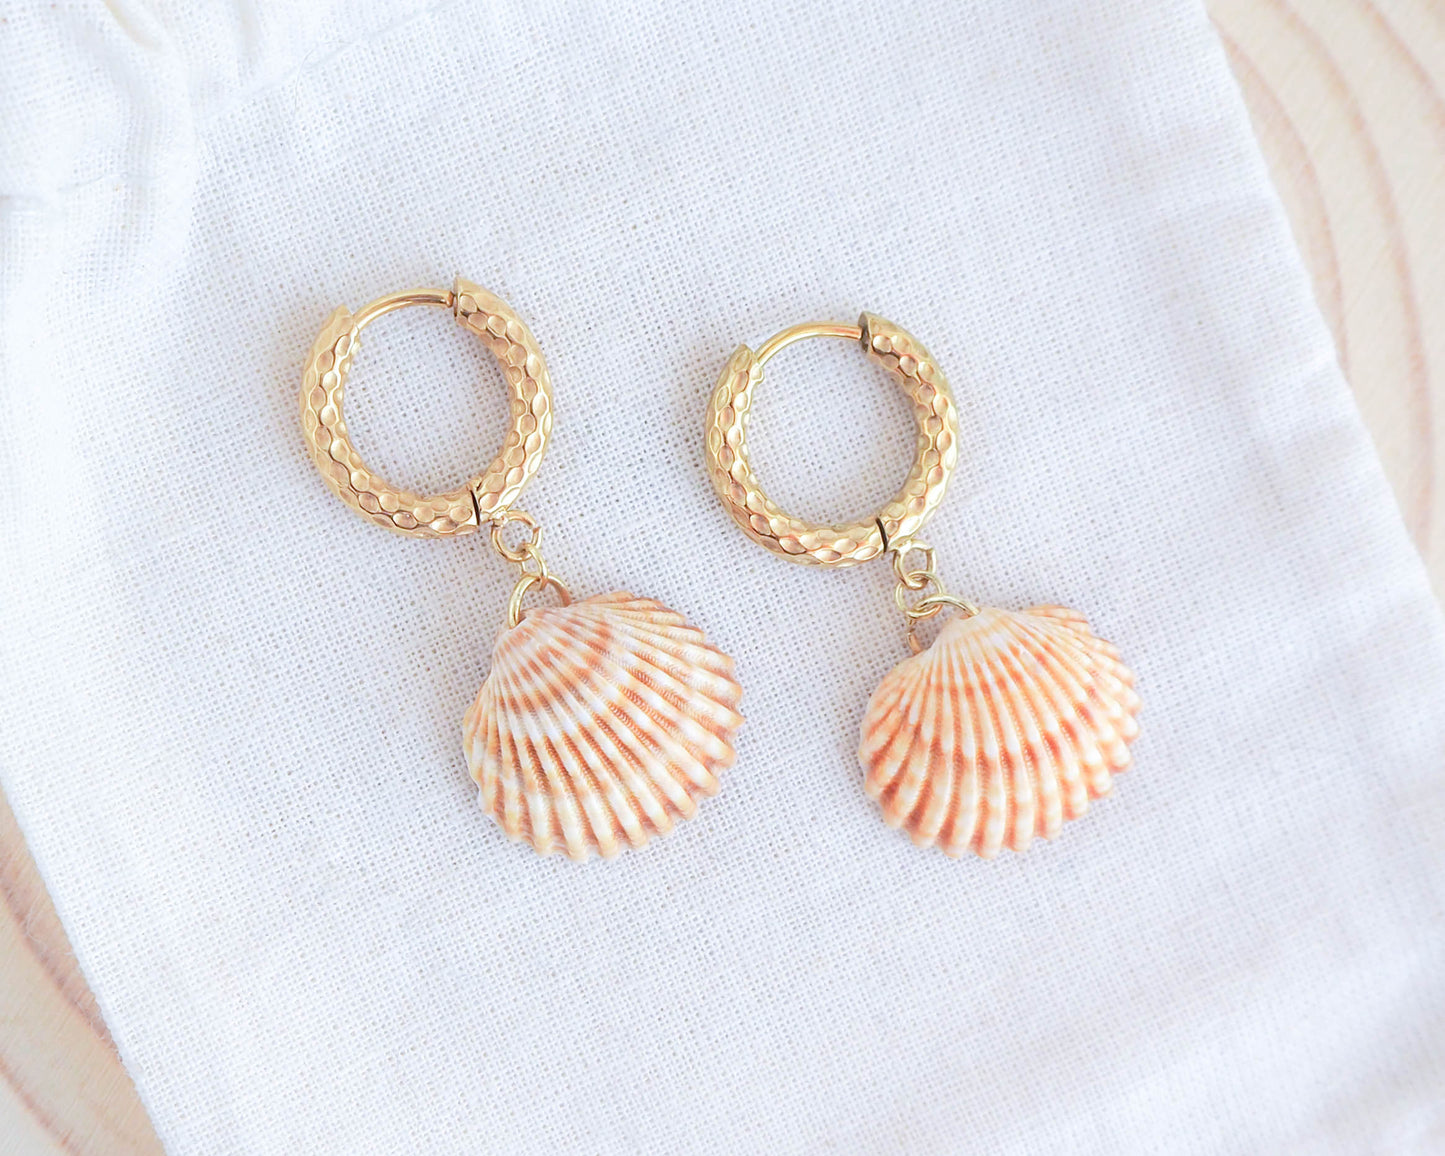 Gold Mediterranean Cockle Shell Earrings with Gold Loop Hooks – Seaside Chic Jewelry